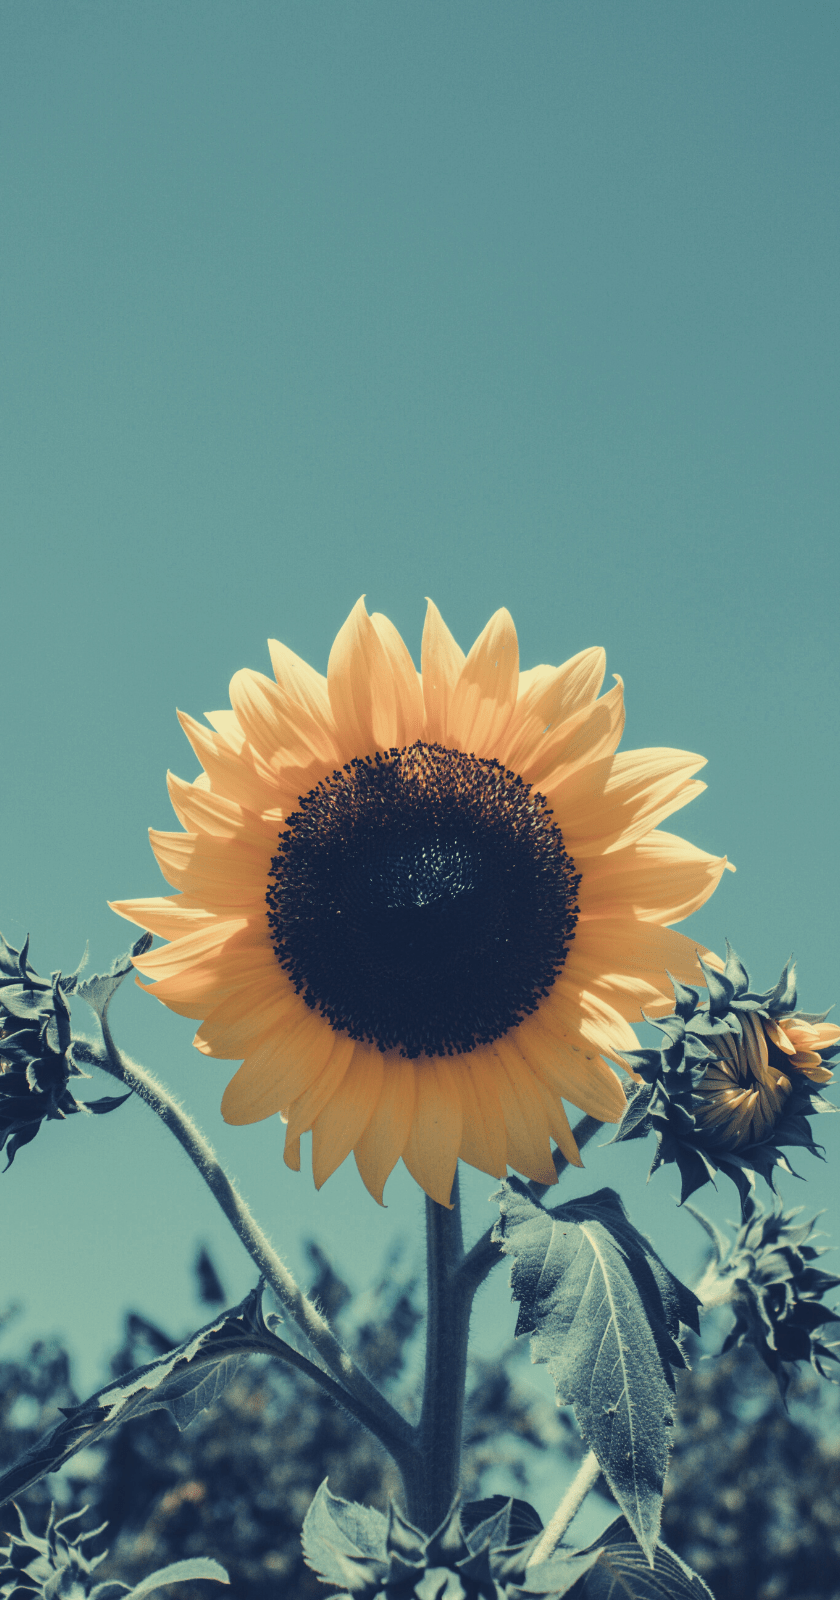 A sunflower in a field with a blue sky in the background - Sunflower, photography